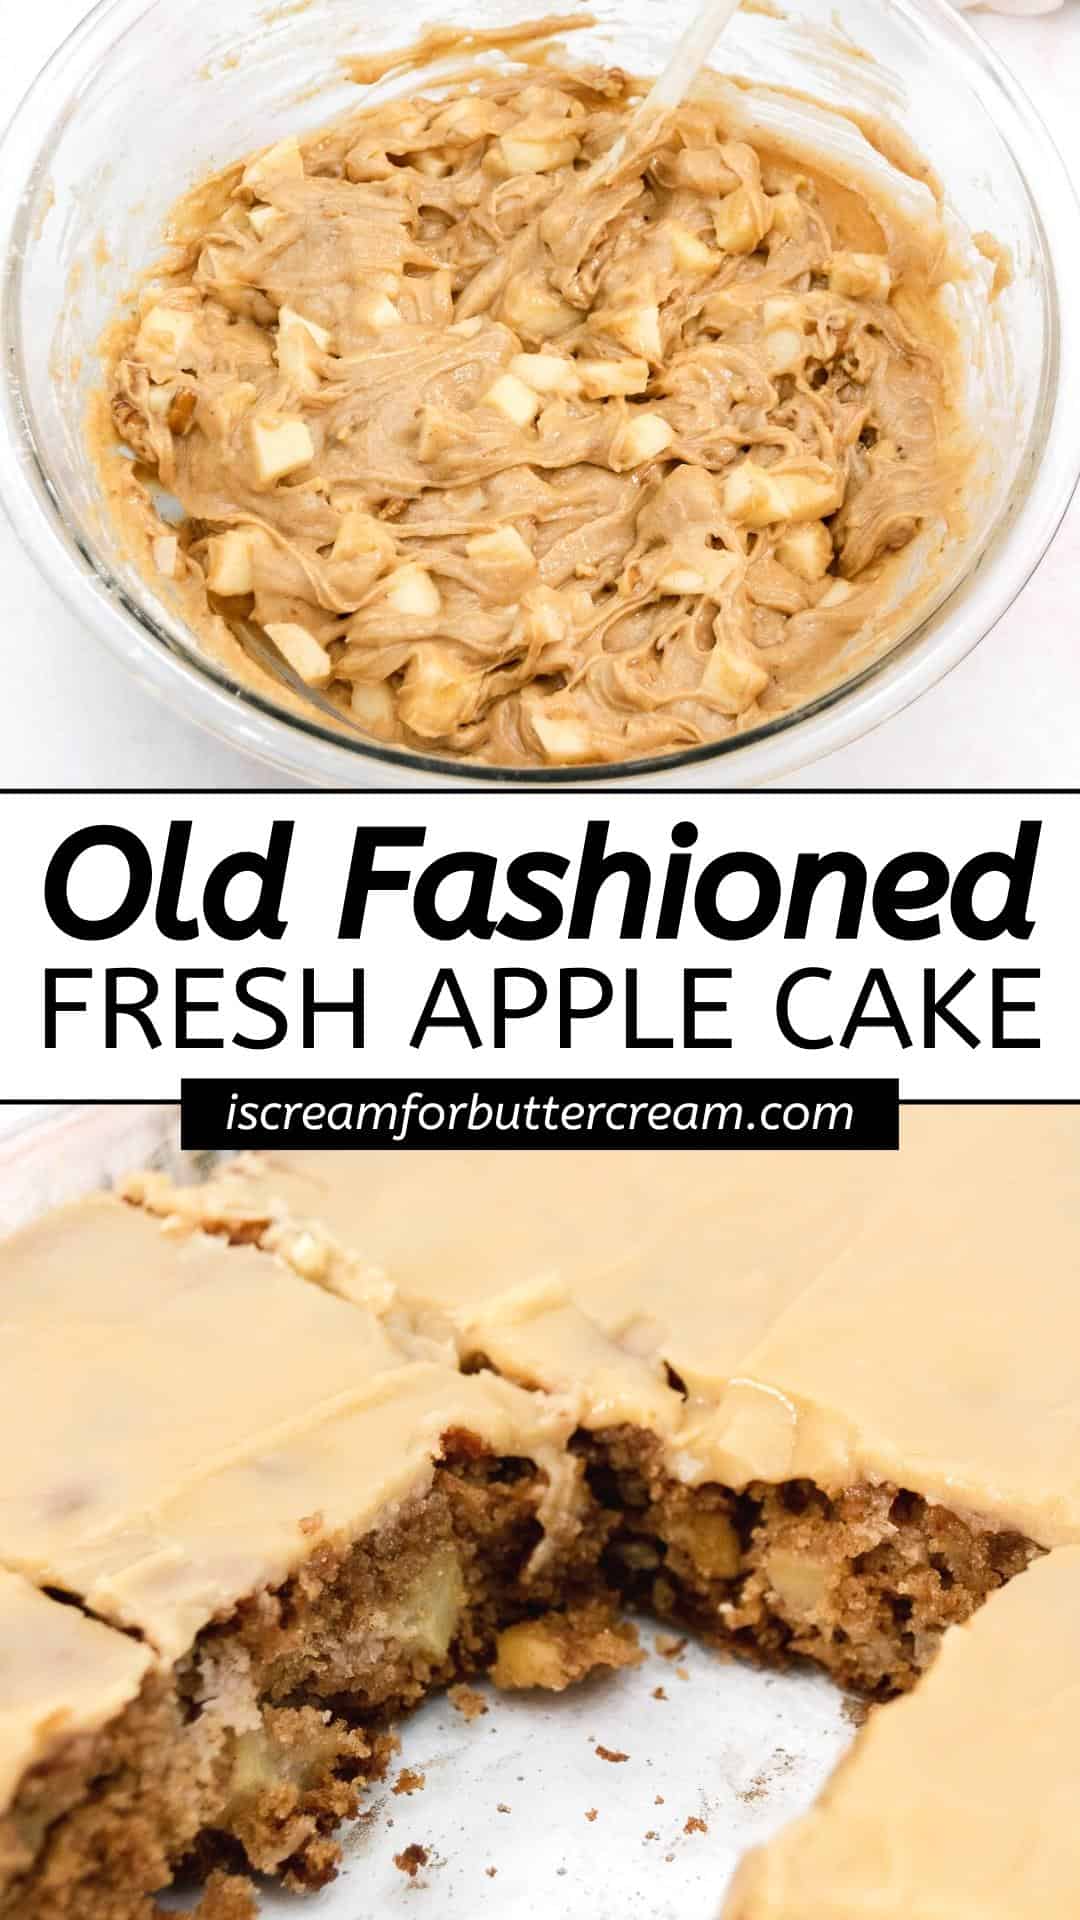 Collage of apple cake batter and baked cake pin 2.